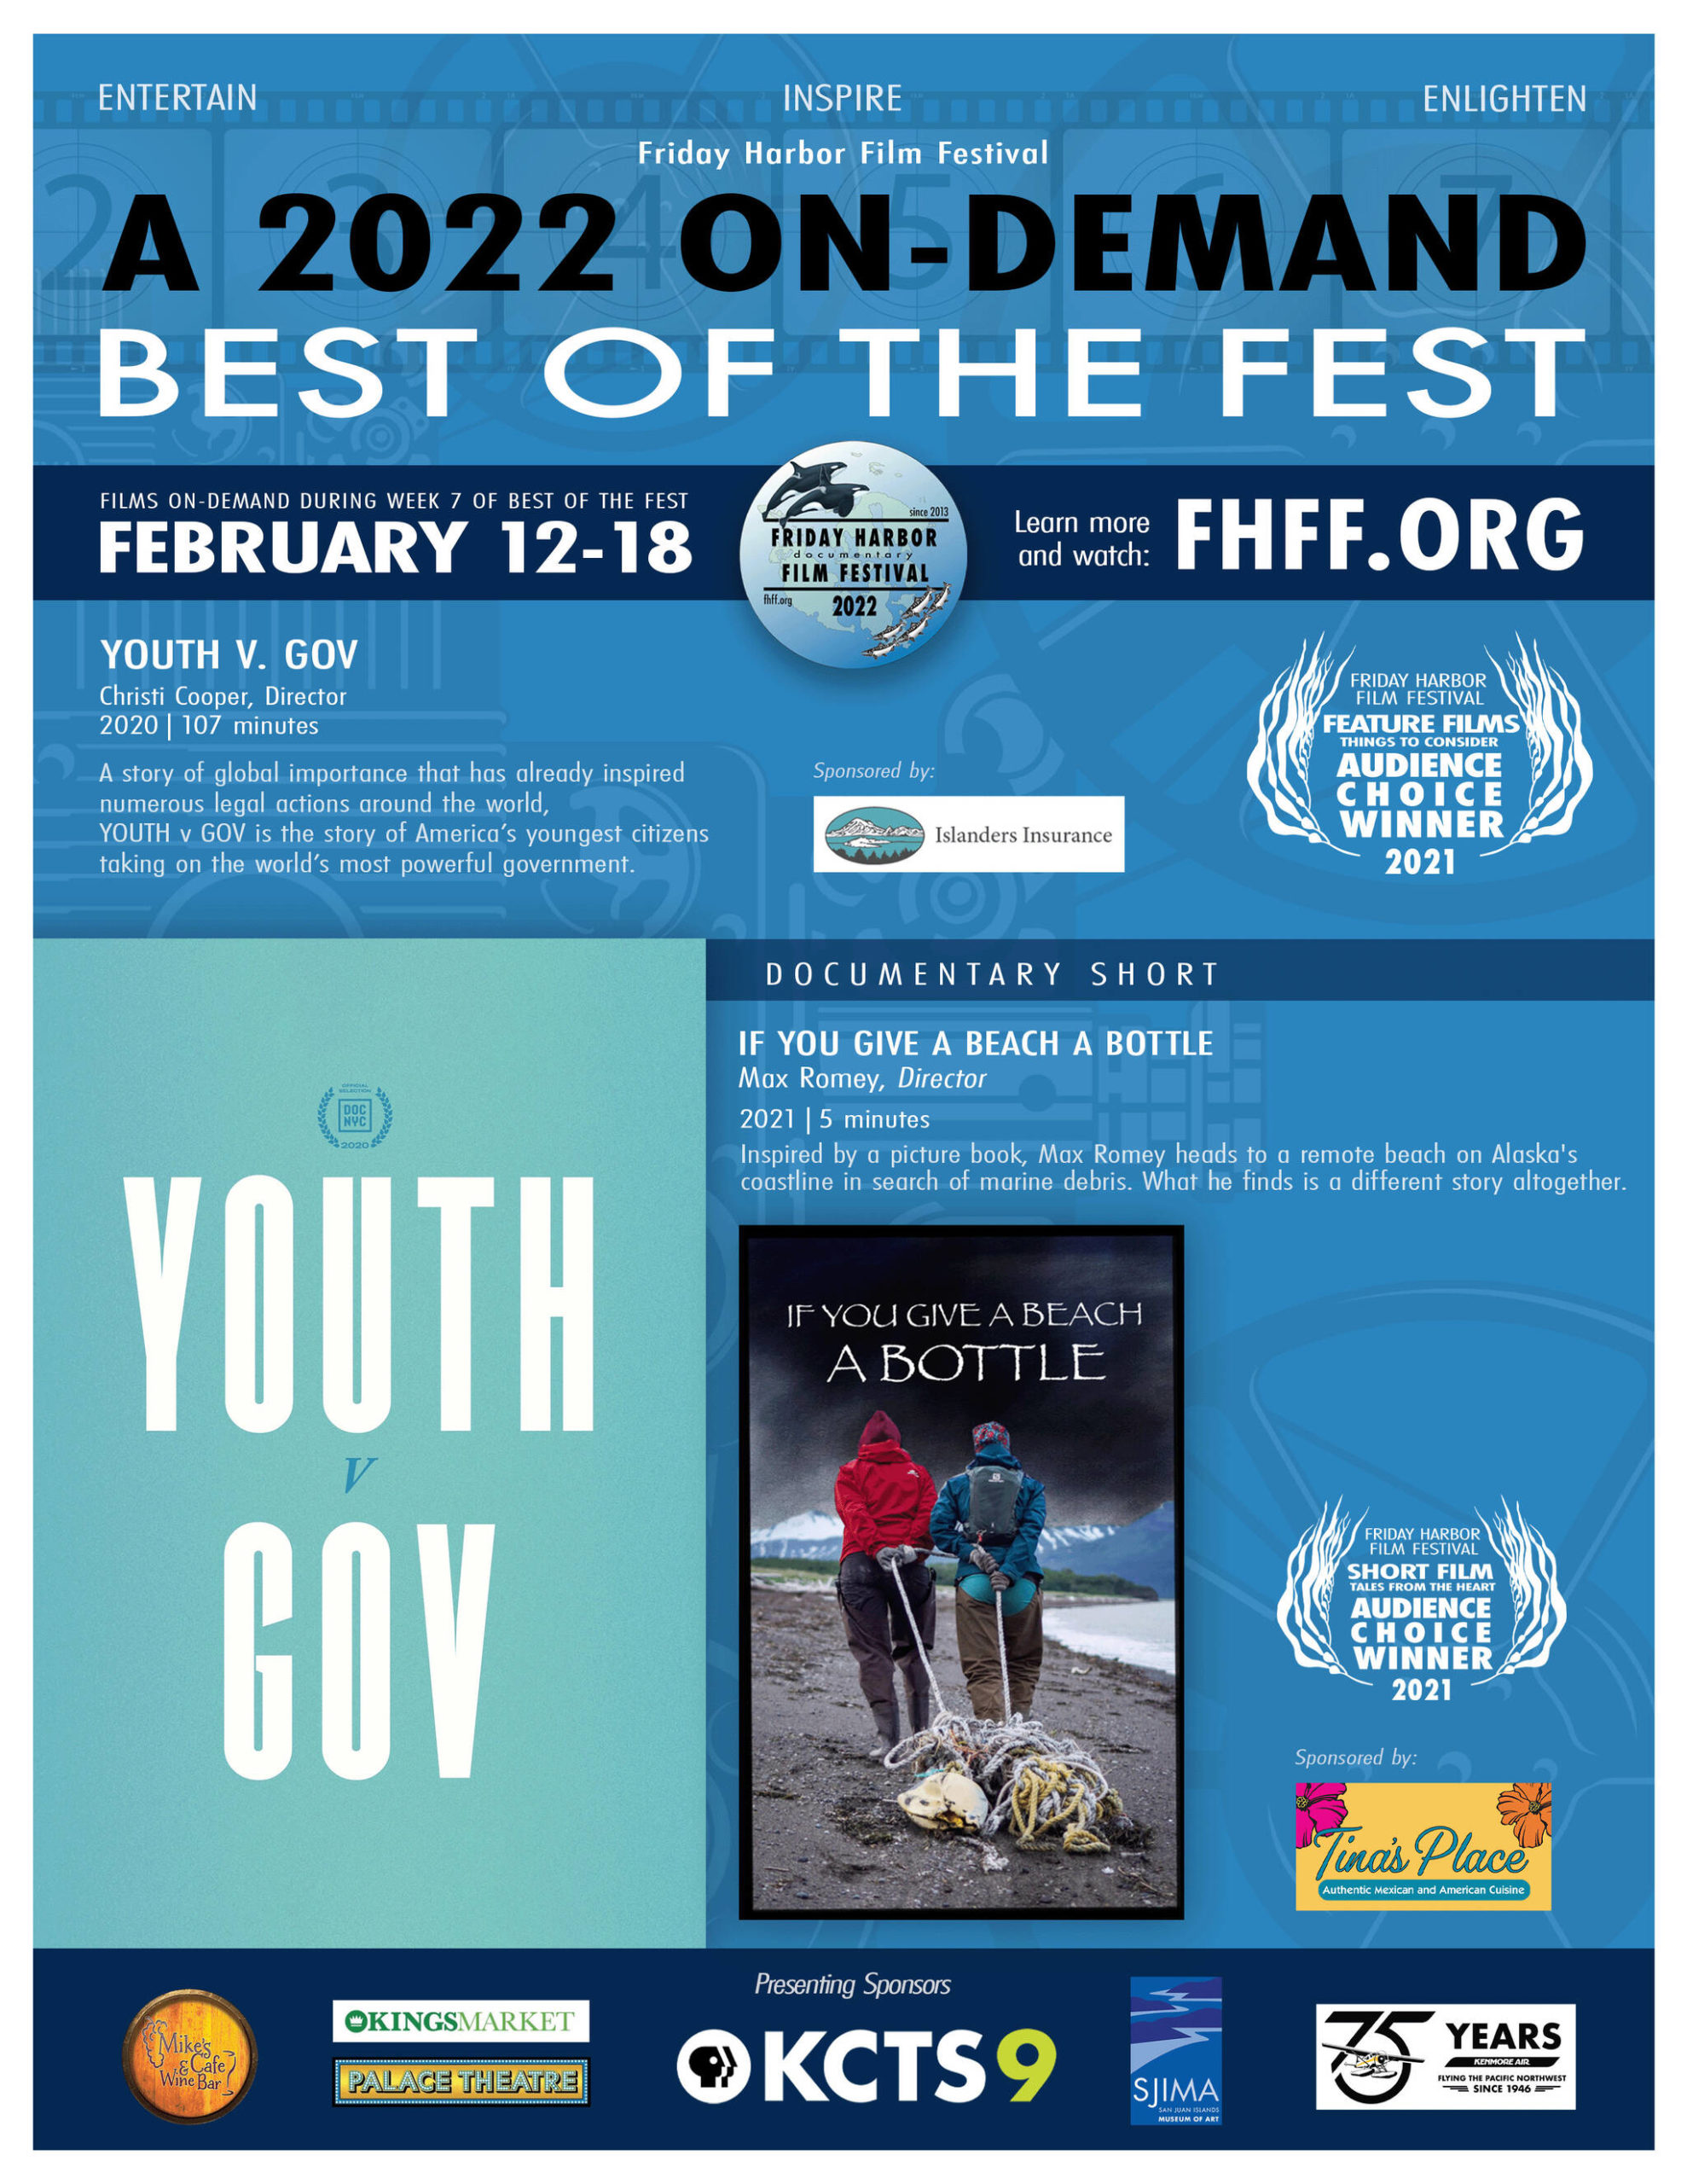 Best of the Fest film